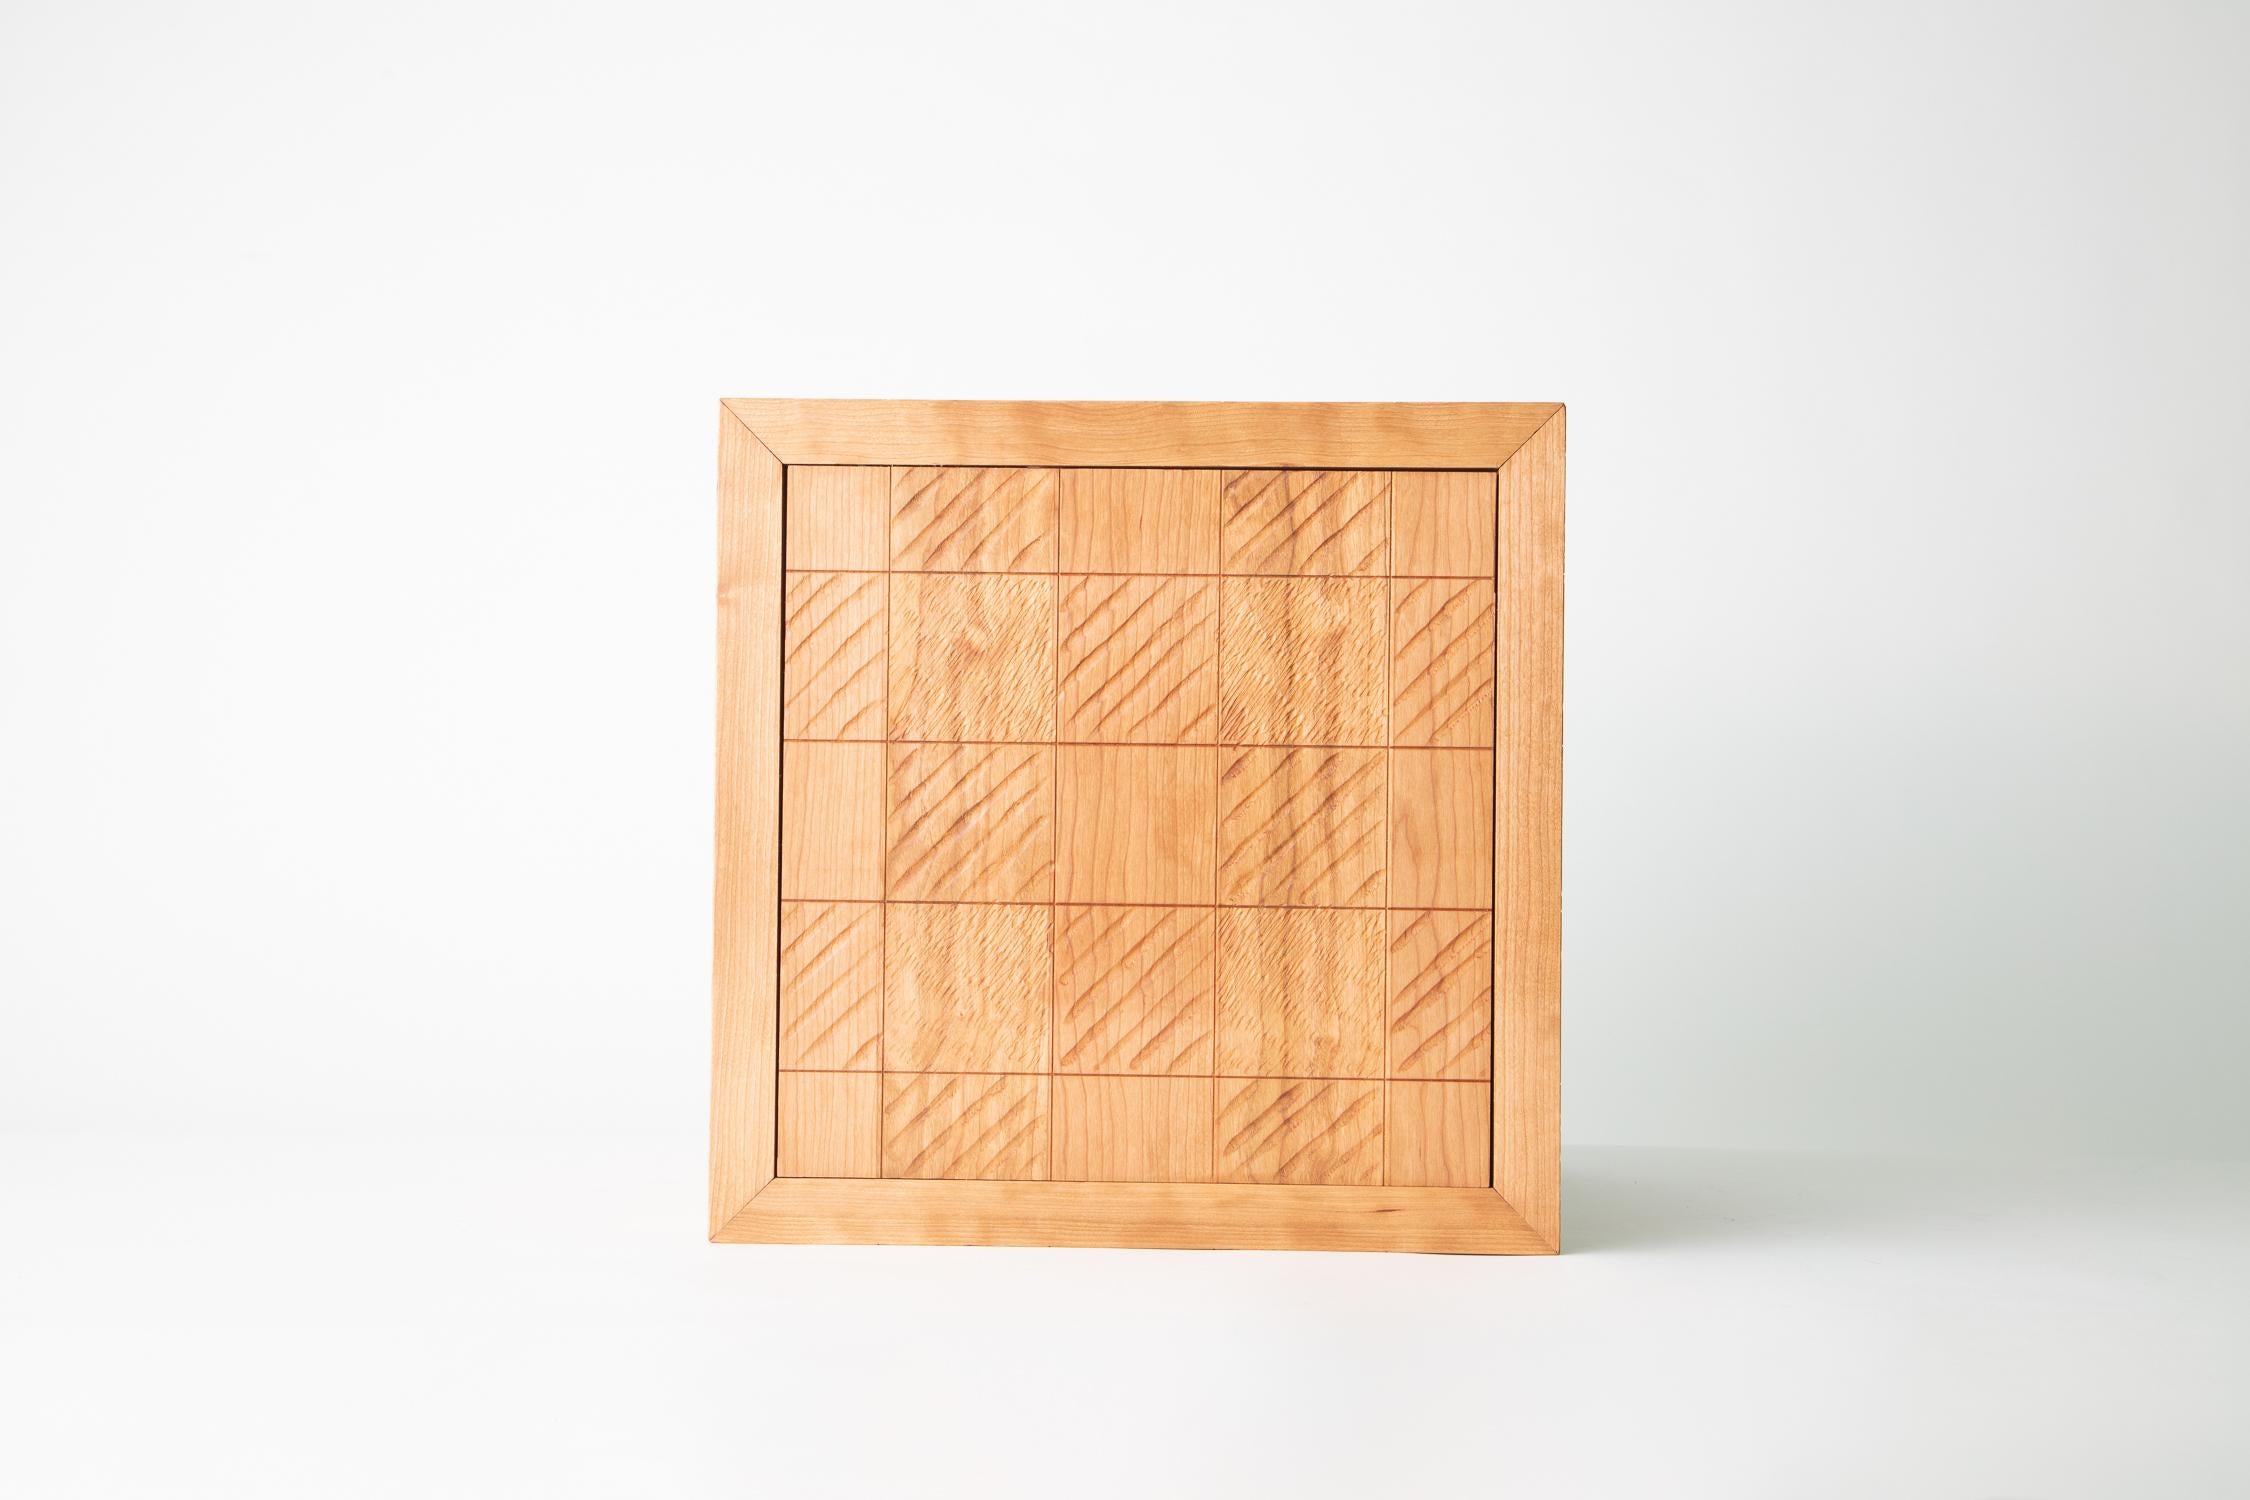 Carved Lines wooden cube, Cherry Buffalo Plaid

Noah James Spencer's Wooden Cubes are minimalist sculptures. Made in plain or carved patterned wood, they easily stand alone in a room, yet in multiples they become taller towers or room dividers.